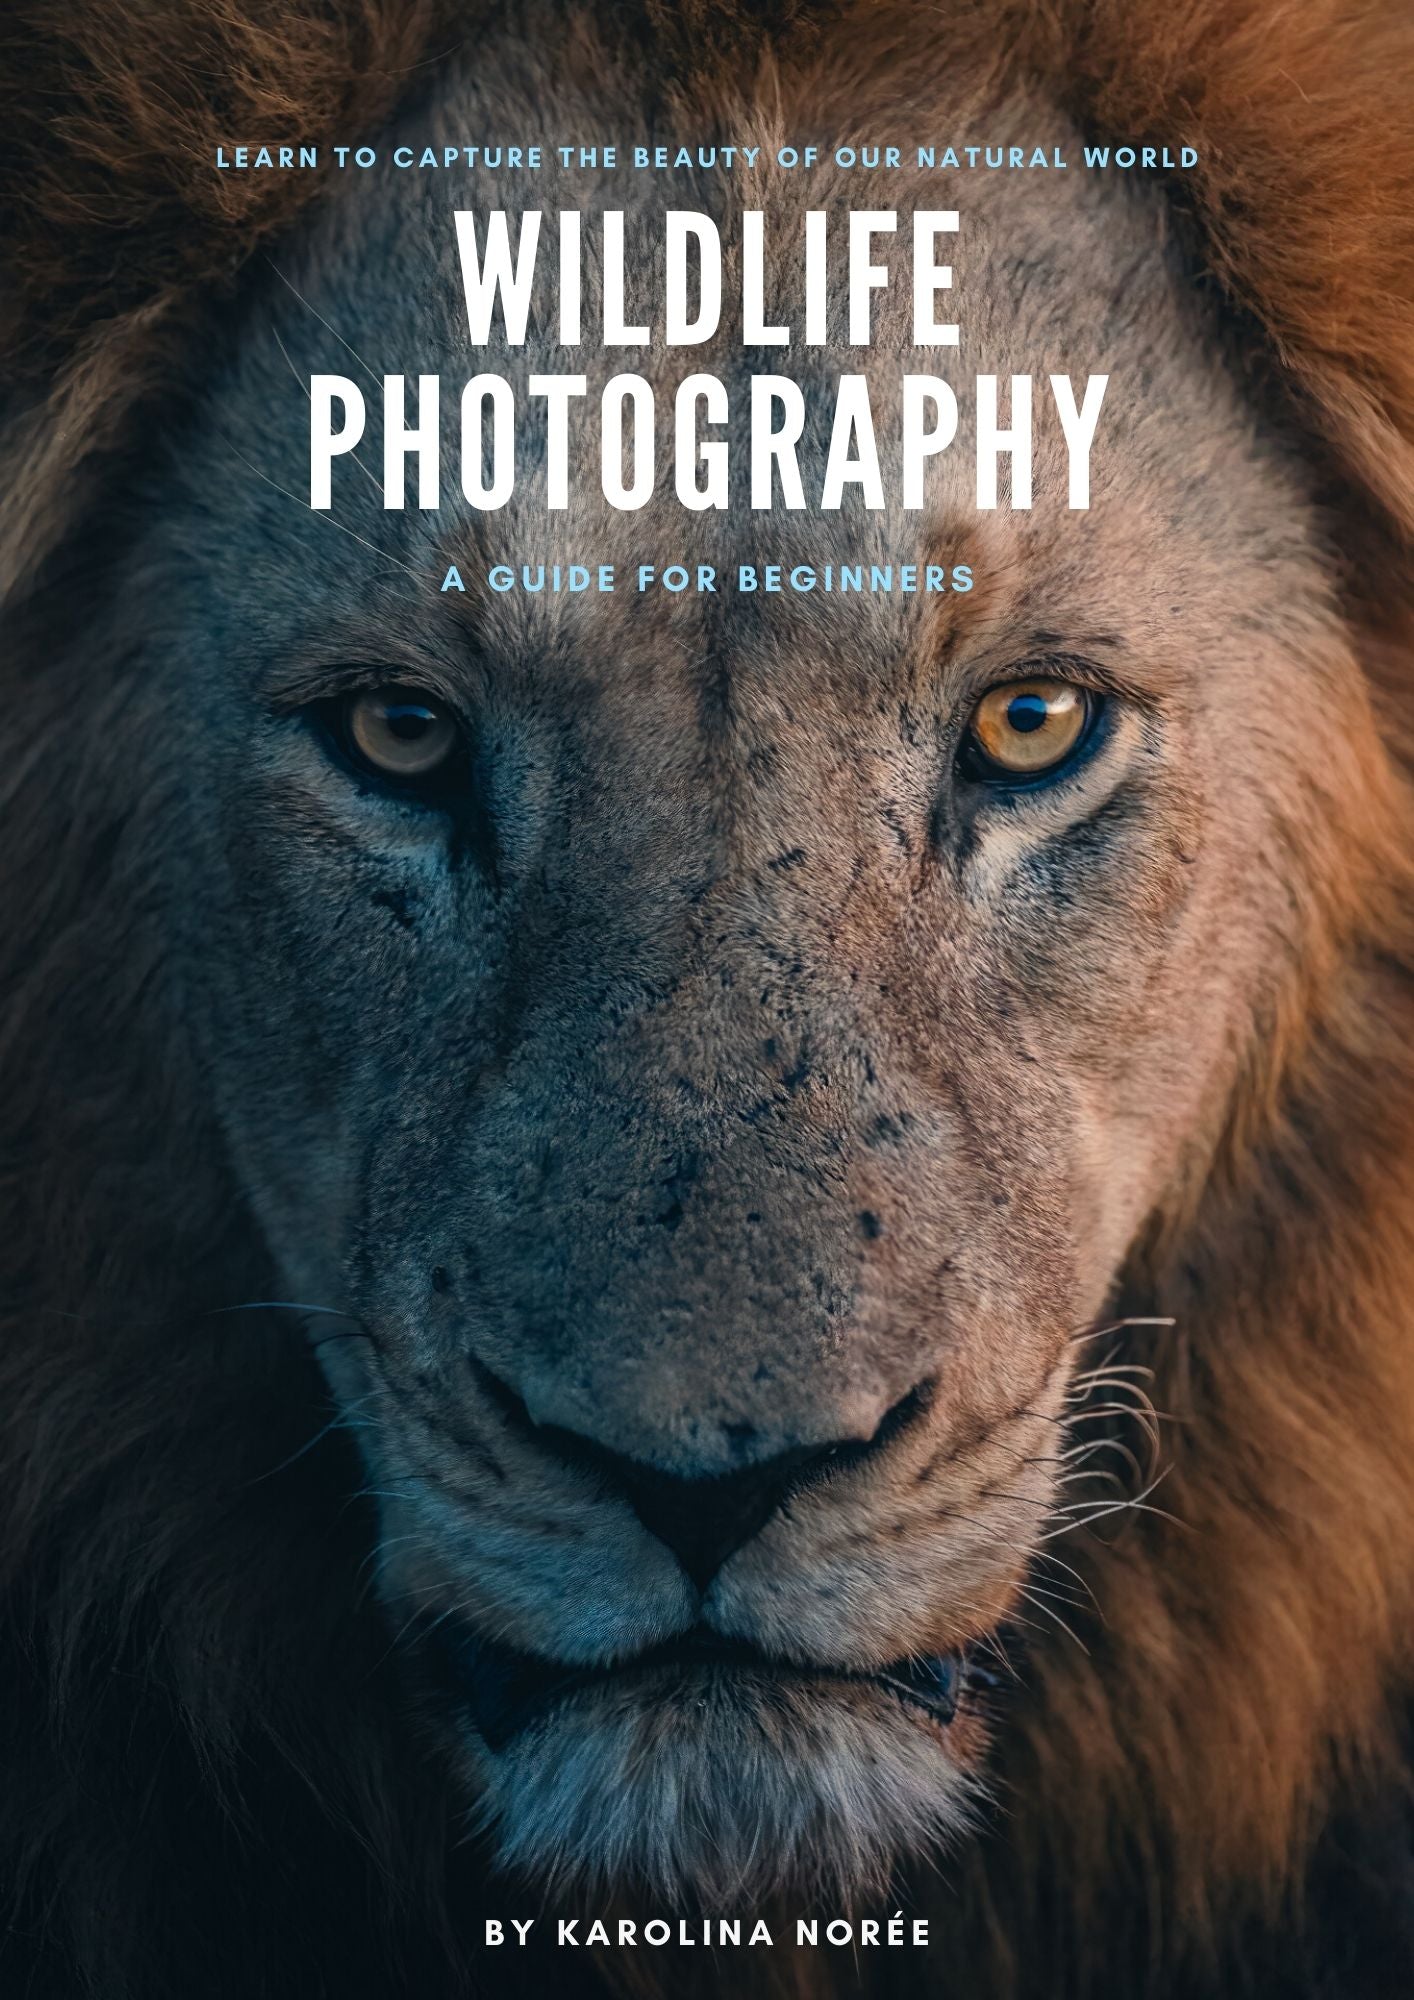 Wildlife Photography E-book - Guide for beginners